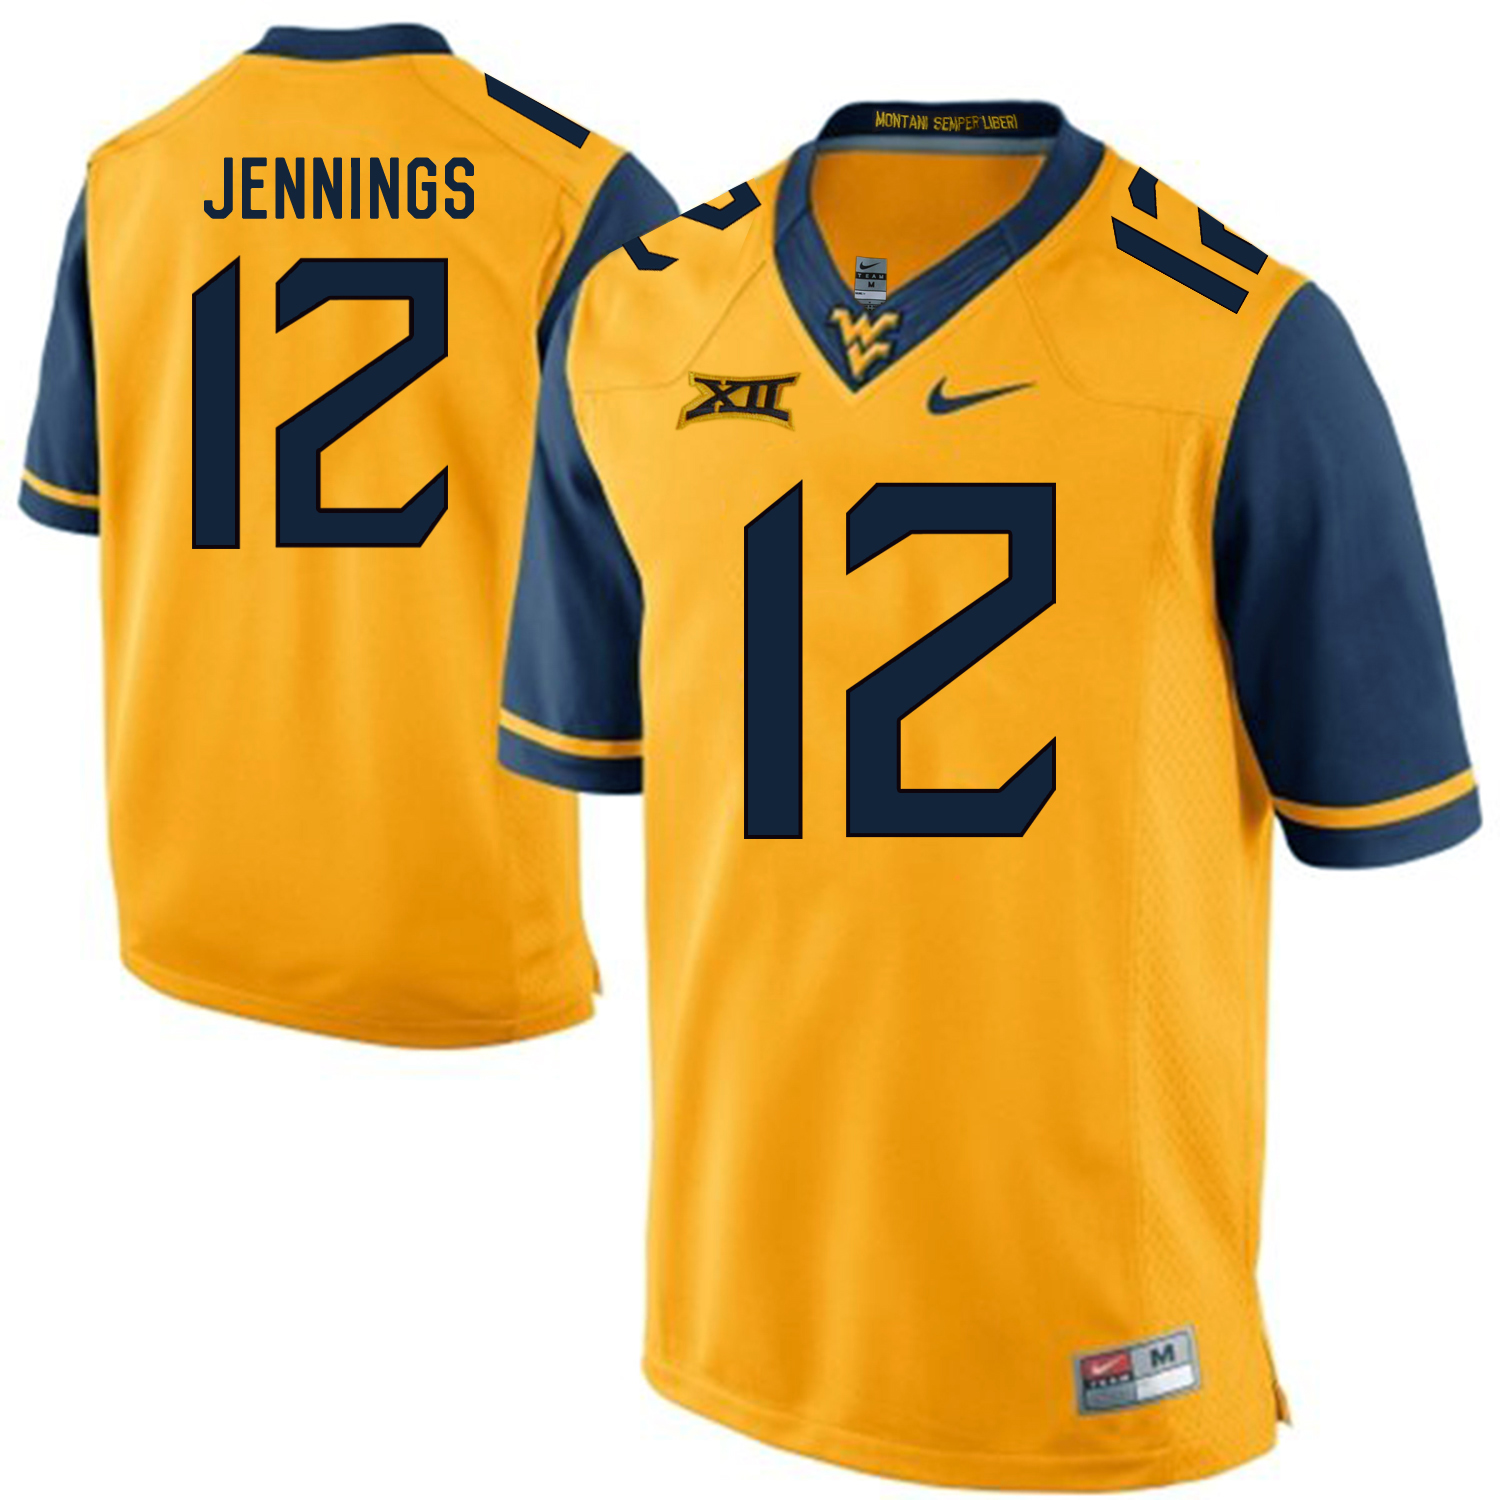 West Virginia Mountaineers 12 Gary Jennings Gold College Football Jersey